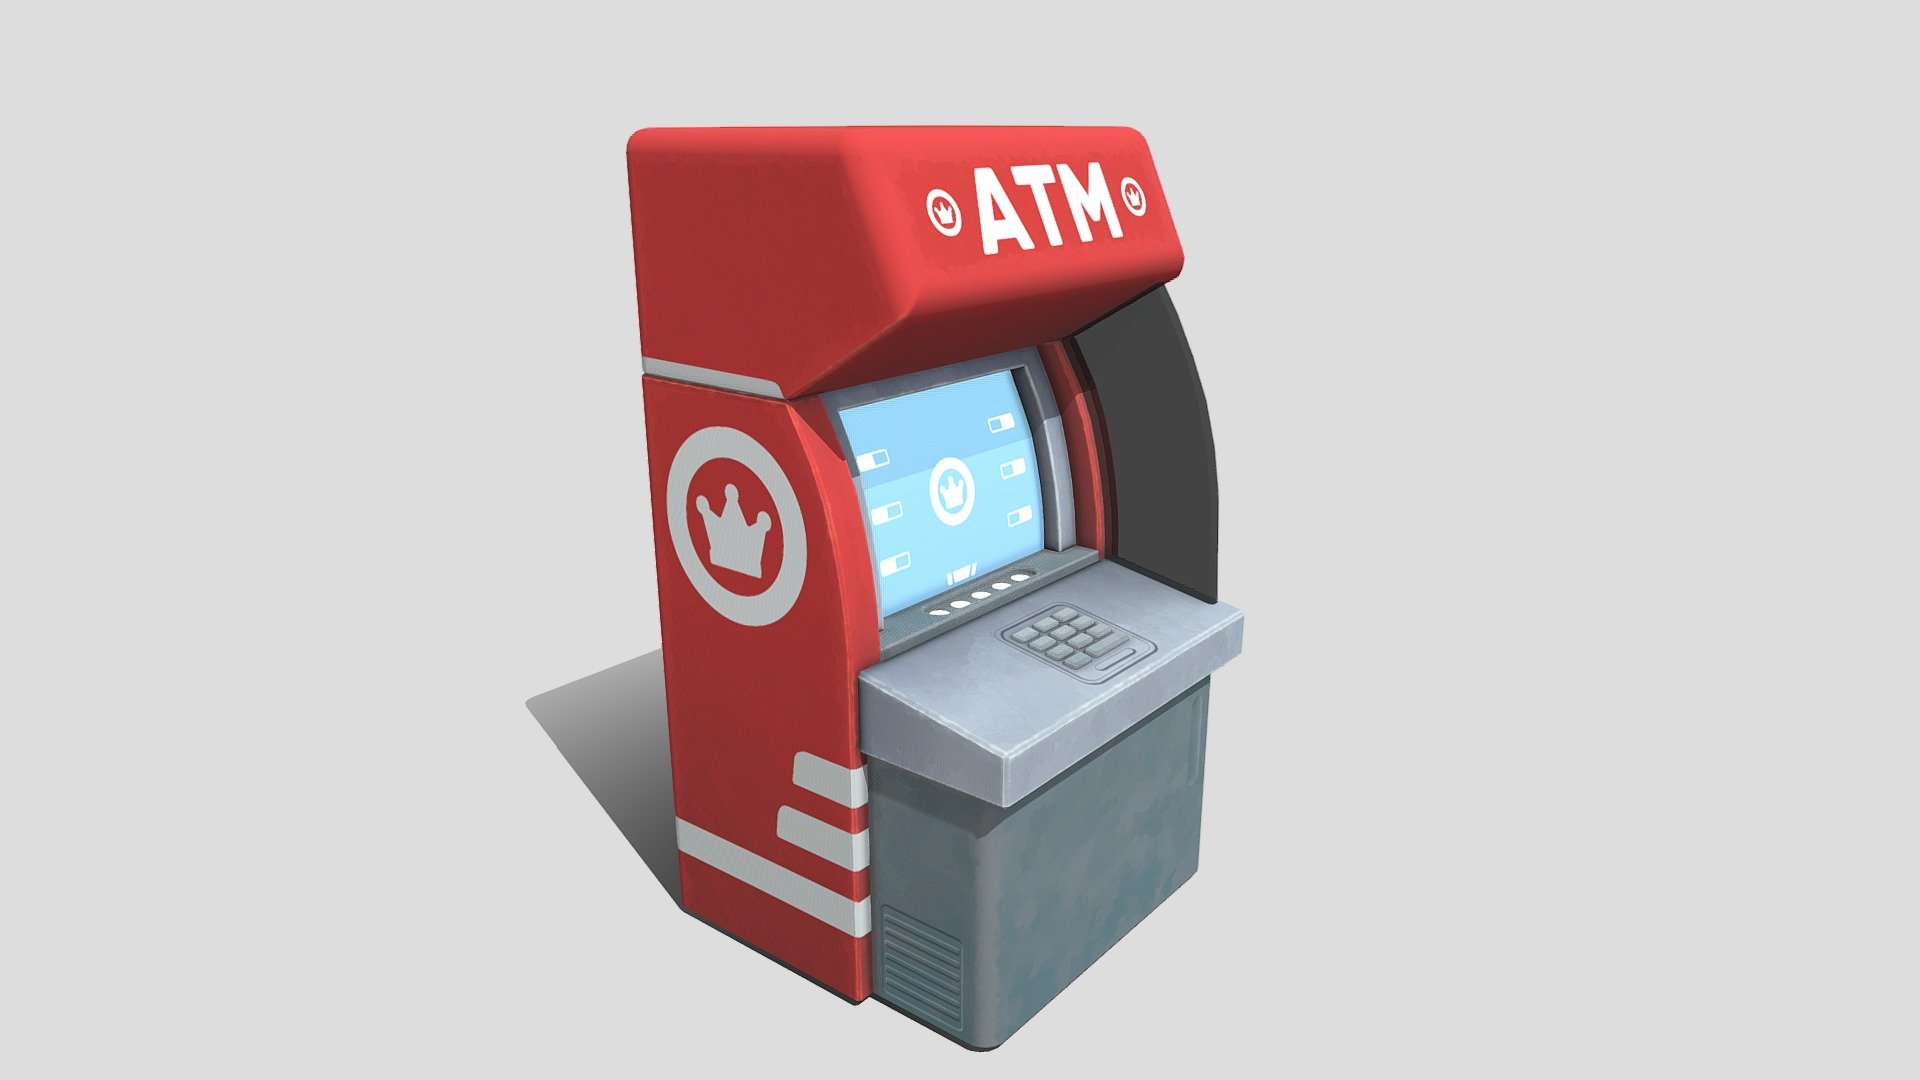 ◼ Gathering Storm Studio Community ◼

Join our Discord to Learn, Create and Share!

Gathering Storm Studio  presents

COSY World - ATM

Designed and developed by industry developers, the COSY ATM has development functionality, quality and low cost built in. With consistent and clean file structures, you can seemlessly implement the asset into your current project. The ATM features multiple variations of the ATM body to match your style as closely as possible. With well planned texturing, the ATM also offers the ability to change the colours of the body without any extra texture map purchases needed. We value your time and your savings!

◼ Key Features ◼
-Optimized Model.
-High Quality 2k Hand Painted Textures.
-Perfect Texturing For Changing Colours.
◼ Assets ◼
-x1 ATM Model
-x10 Texture Maps. (Diffuse, Metallic, Normal, Opacity, Emission for both materials) 3d model